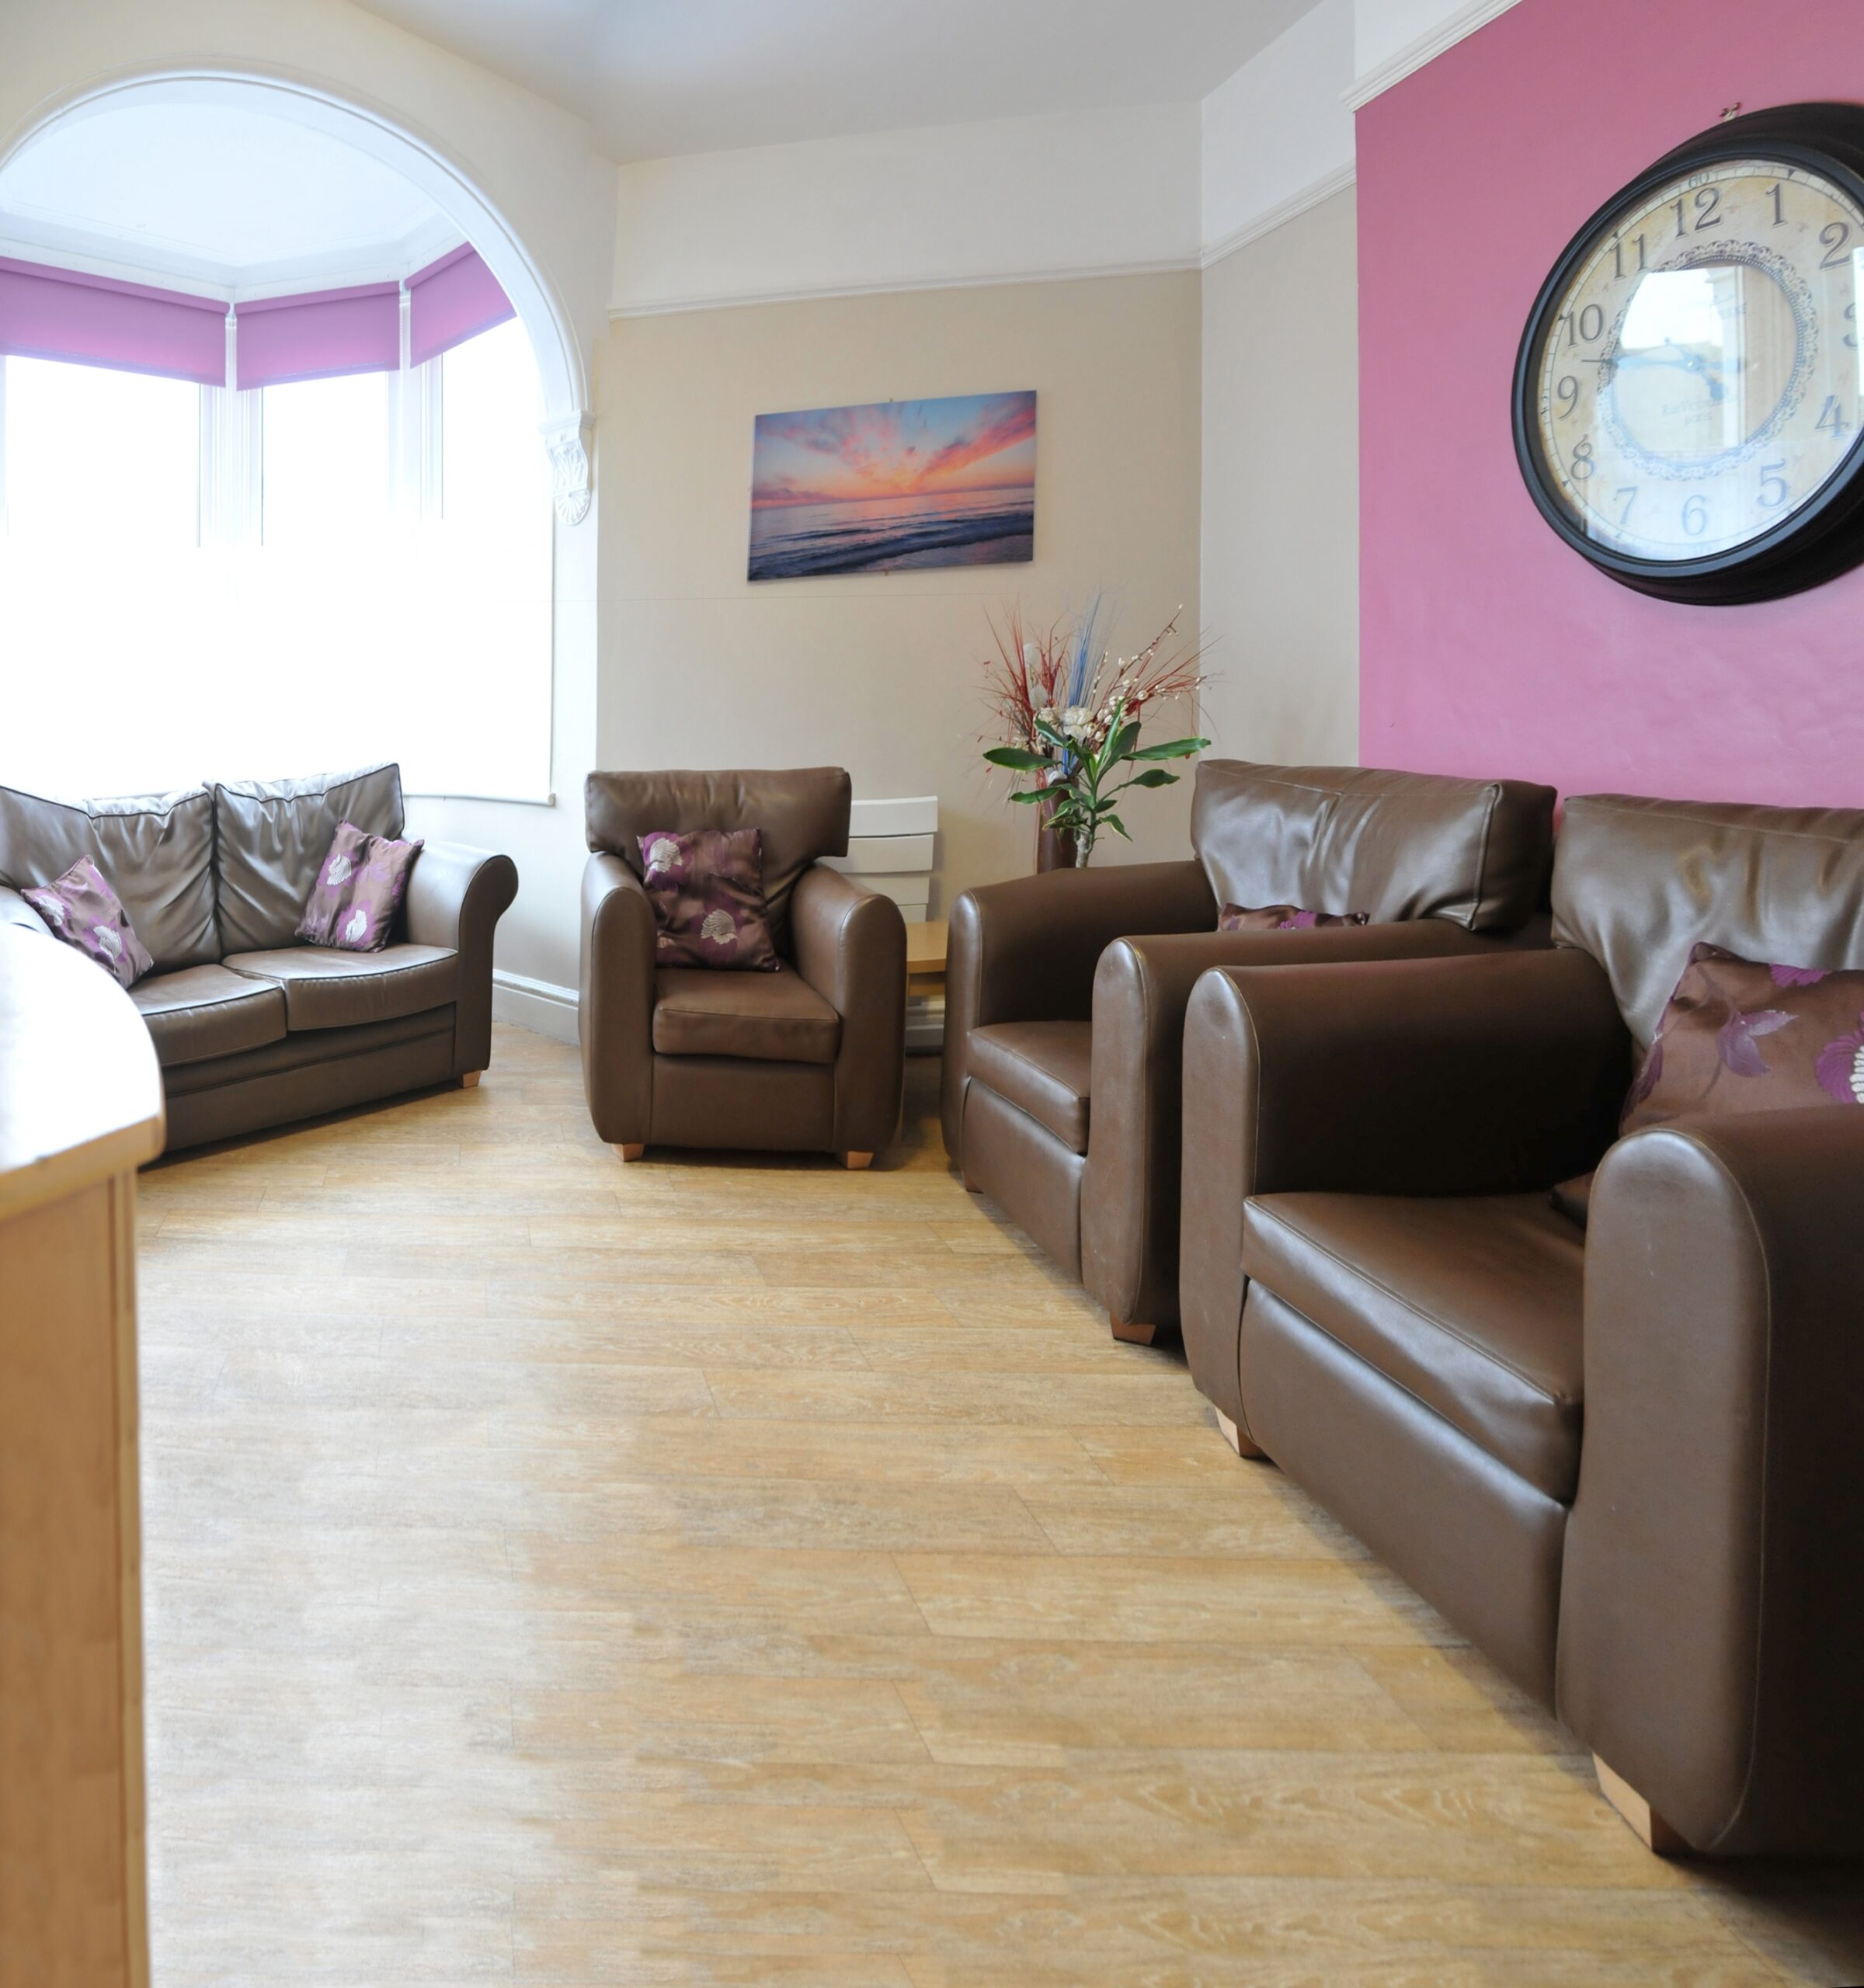 Clacton-on-Sea Supported Living